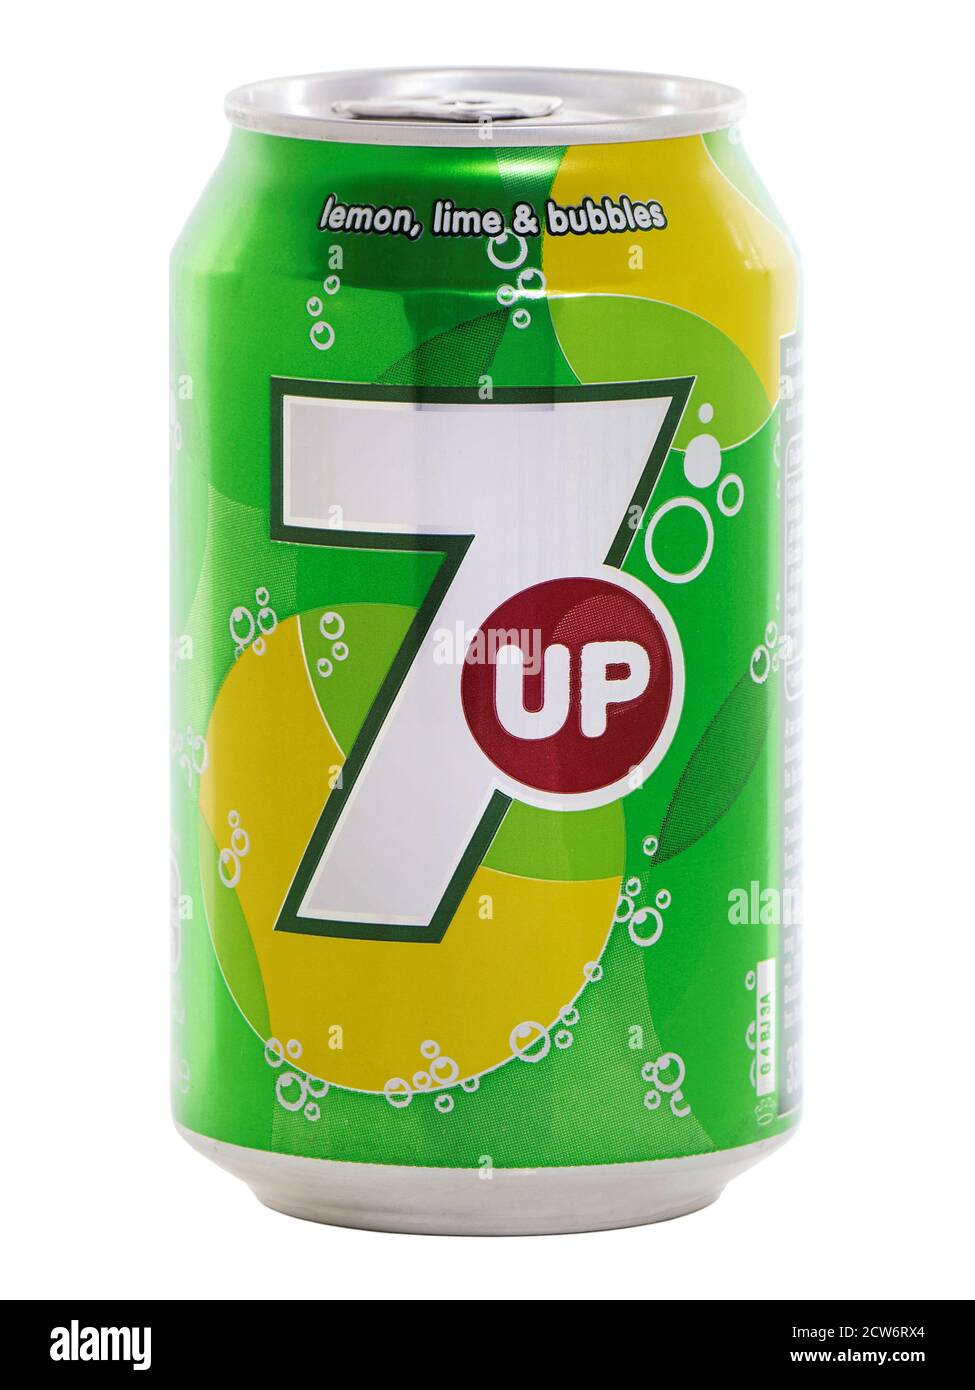 BUCHAREST, ROMANIA - MAY 28, 2015. Can of 7 Up drink, a brand of lemon lime flavored, non-caffeinated soft drink Stock Photo